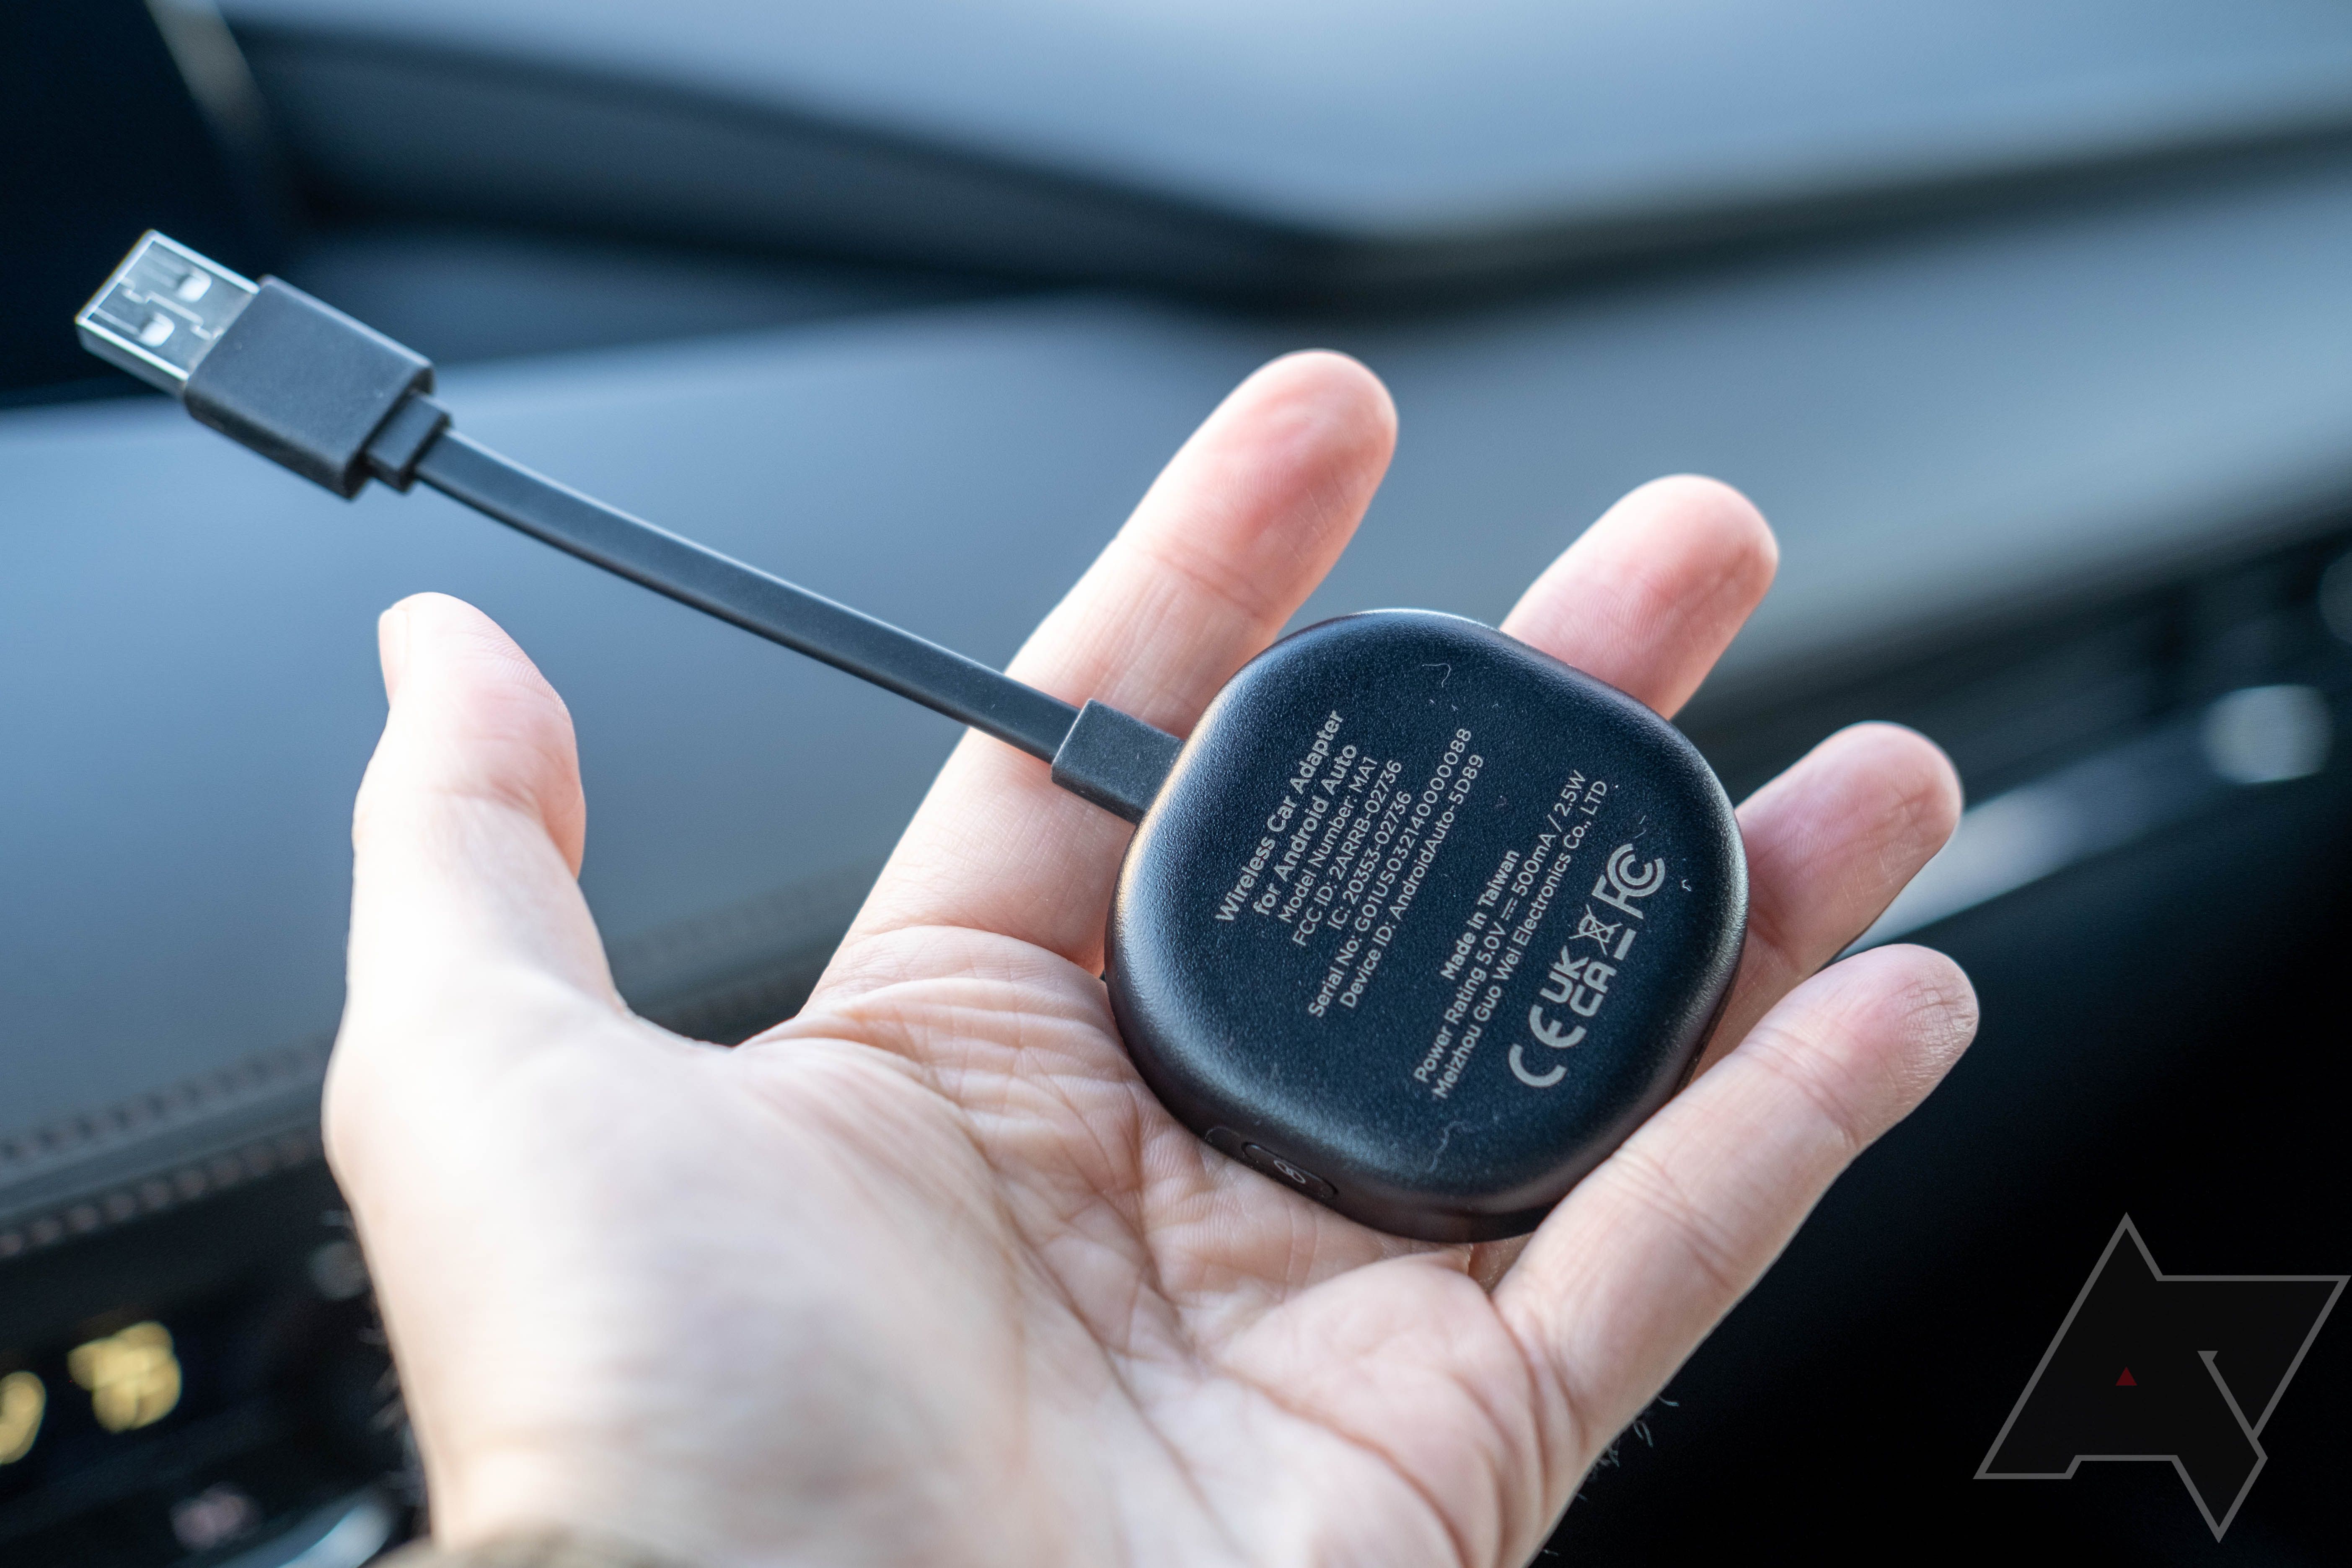  LXJADAP Wireless Android Auto Adapter,Android Wireless